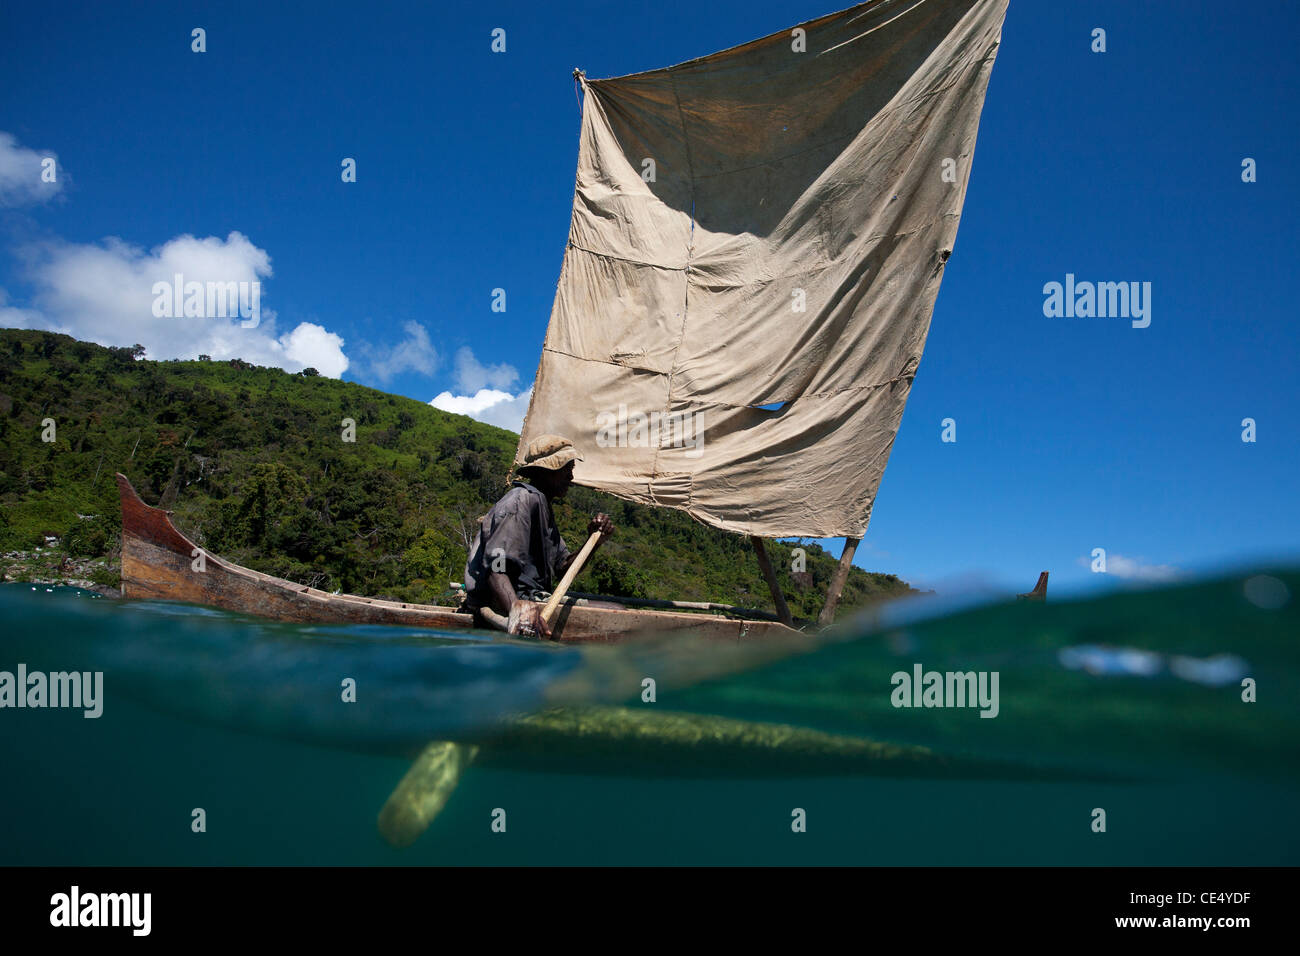 Split under over view of malagasy man rowing his pirogue, or outrigger dugout canoe. Nosy Komba, Madagascar, Africa. Stock Photo